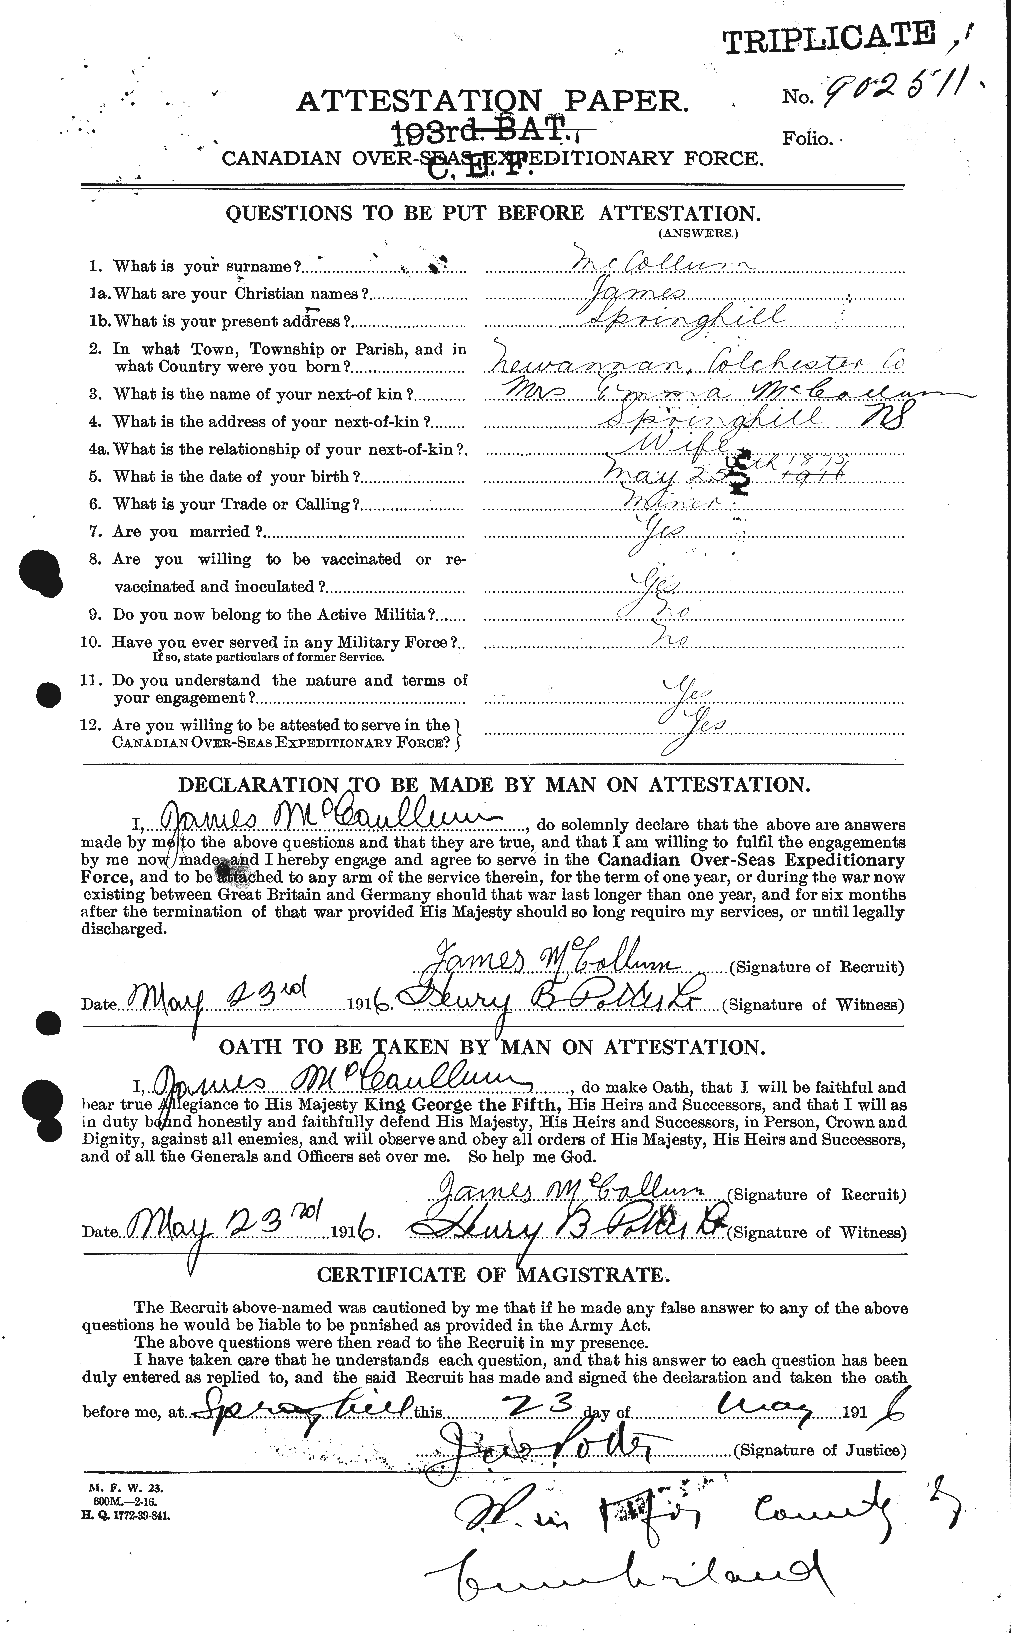 Personnel Records of the First World War - CEF 133340a